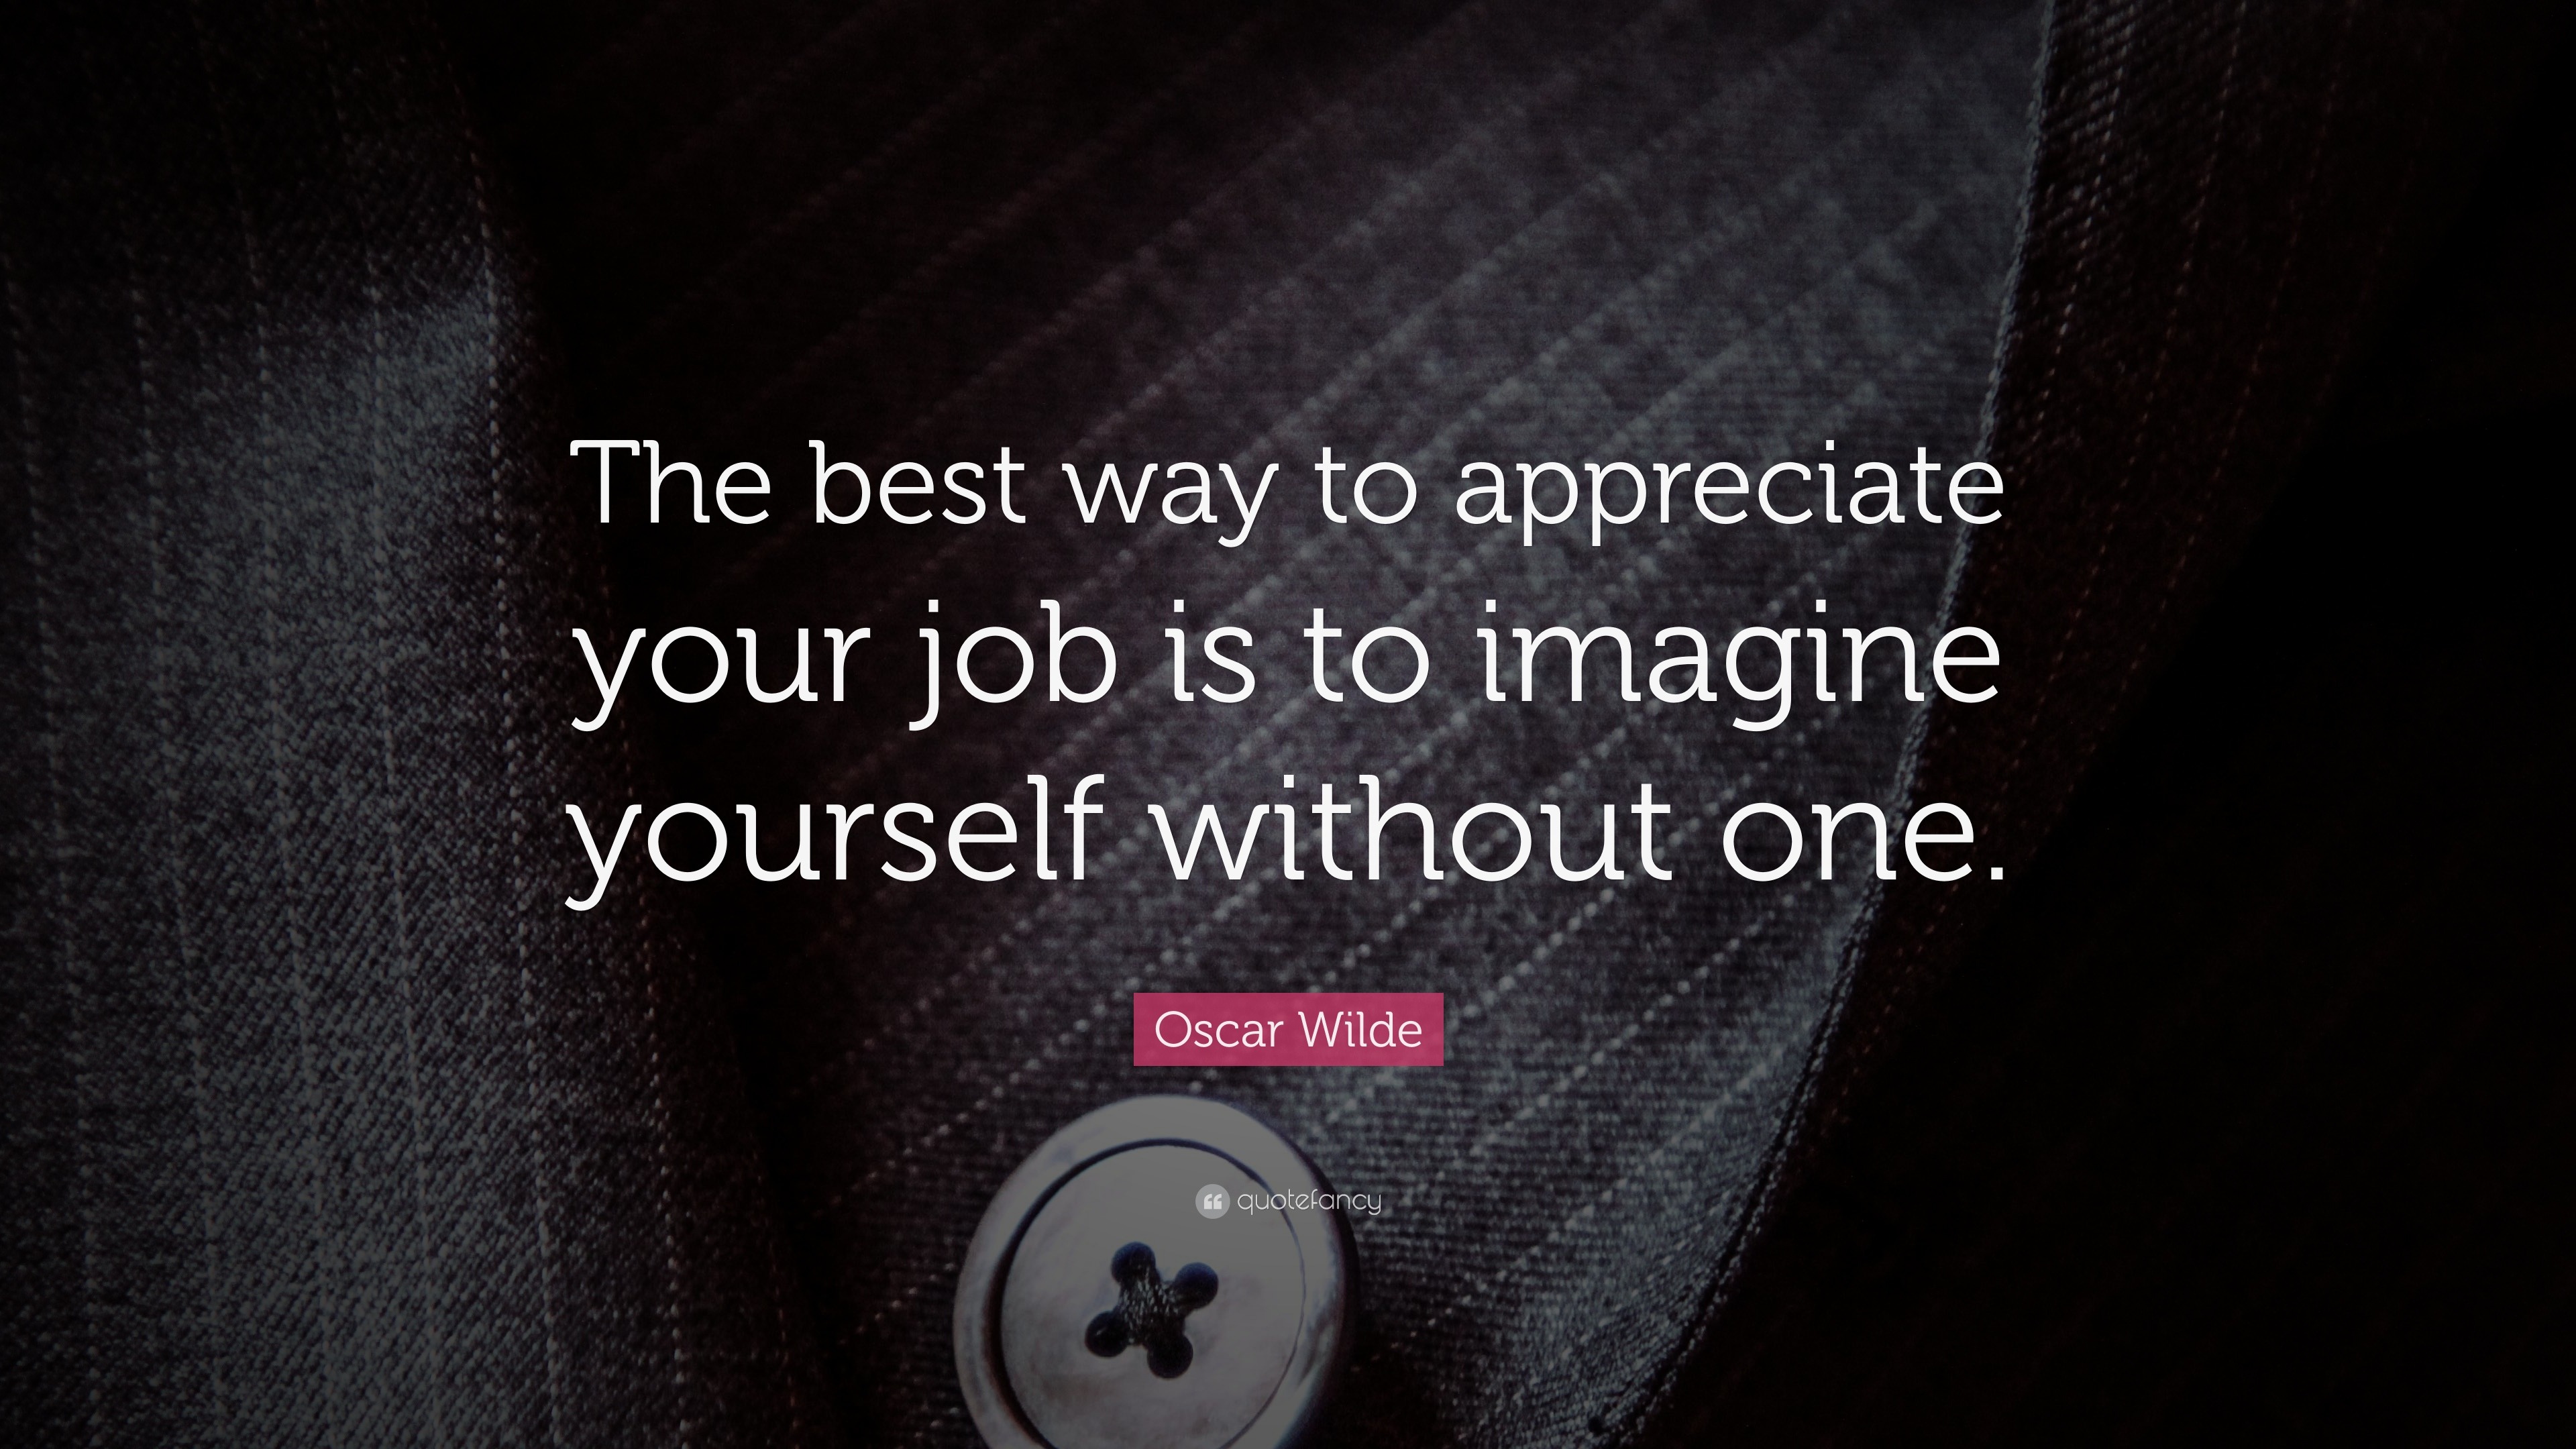 Oscar Wilde Quote: “The best way to appreciate your job is to imagine  yourself without one.”